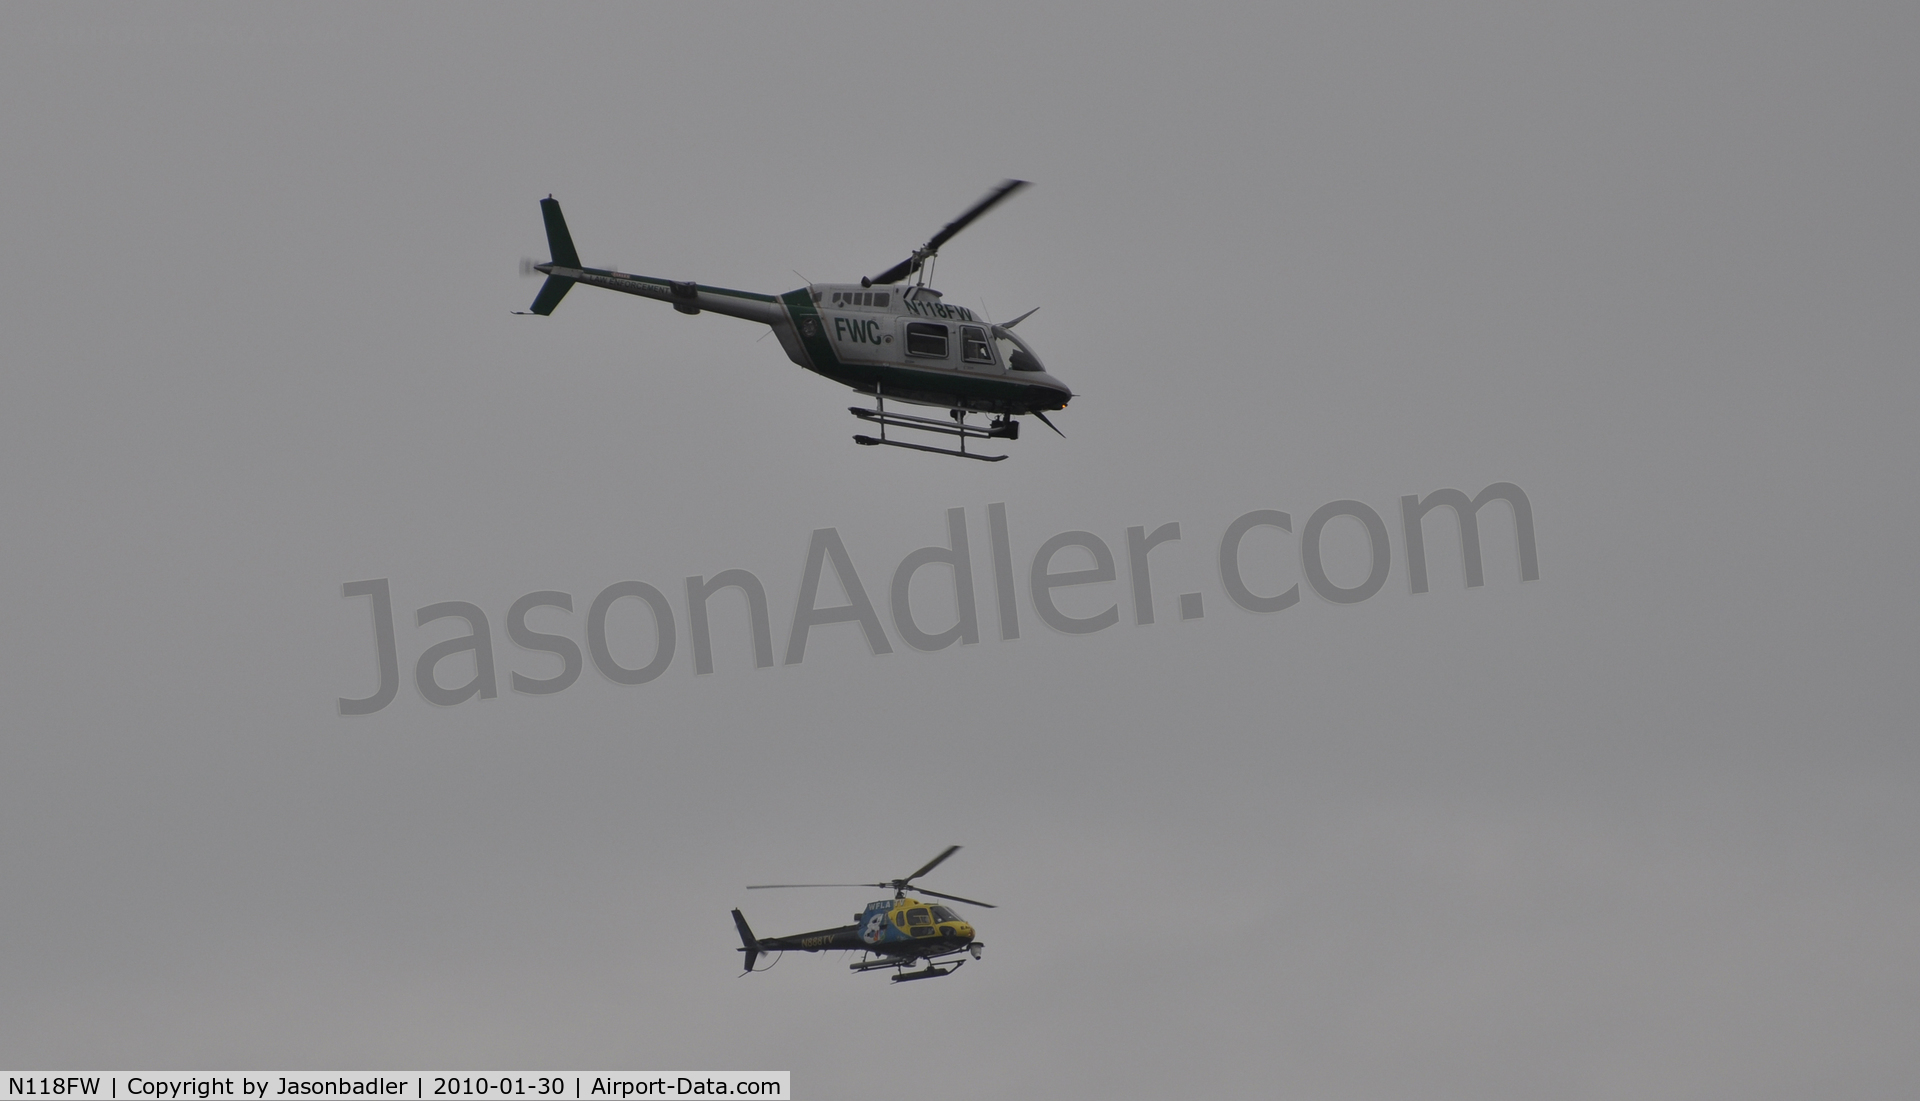 N118FW, 1991 Bell 206B JetRanger III C/N 4182, The photo was shot during Gasparilla 2010 in Tampa Florida.